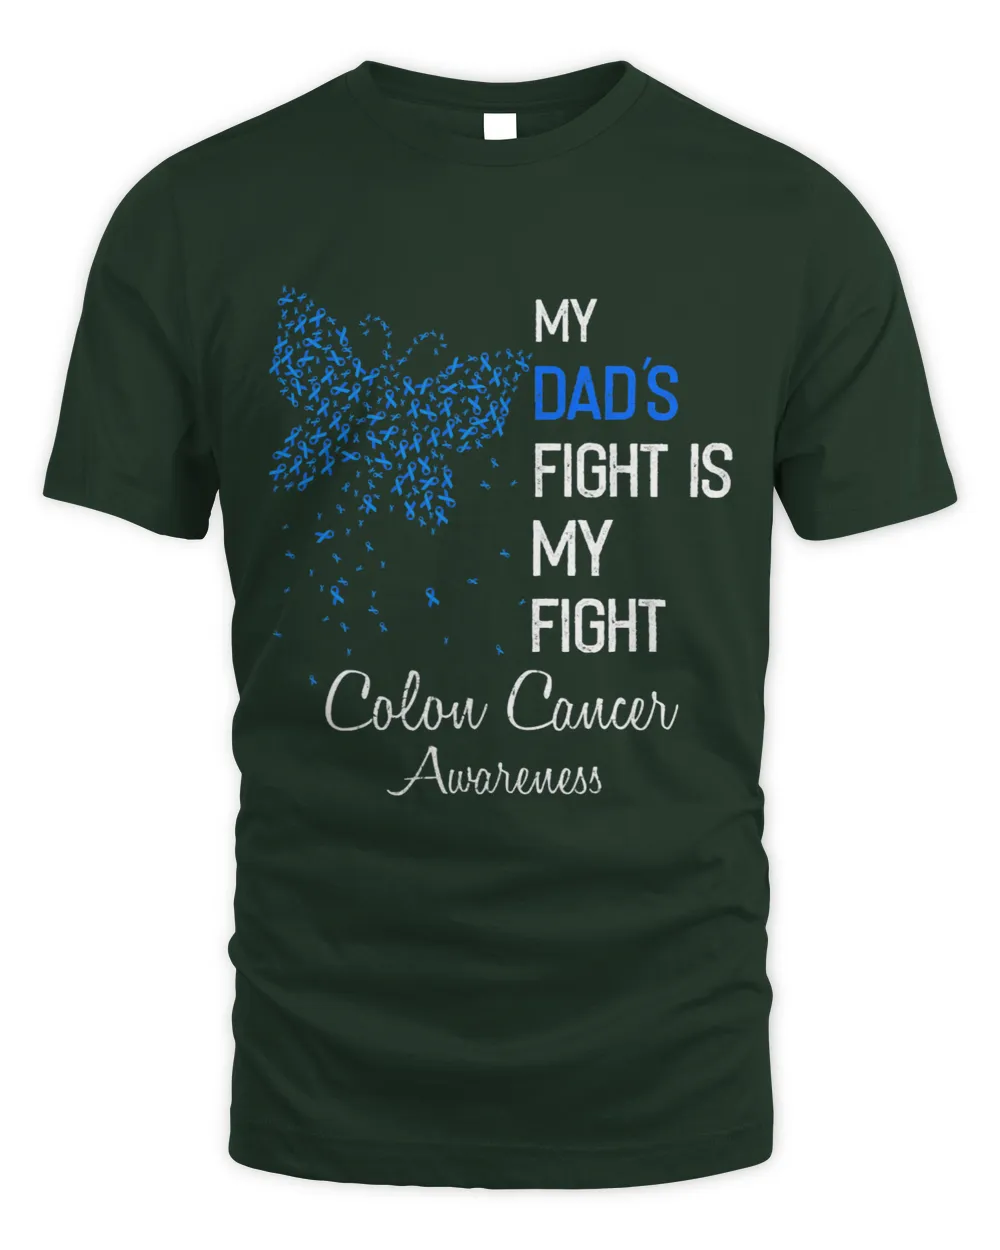 My Dads Fight is My Fight Colon Cancer Awareness Costume 2